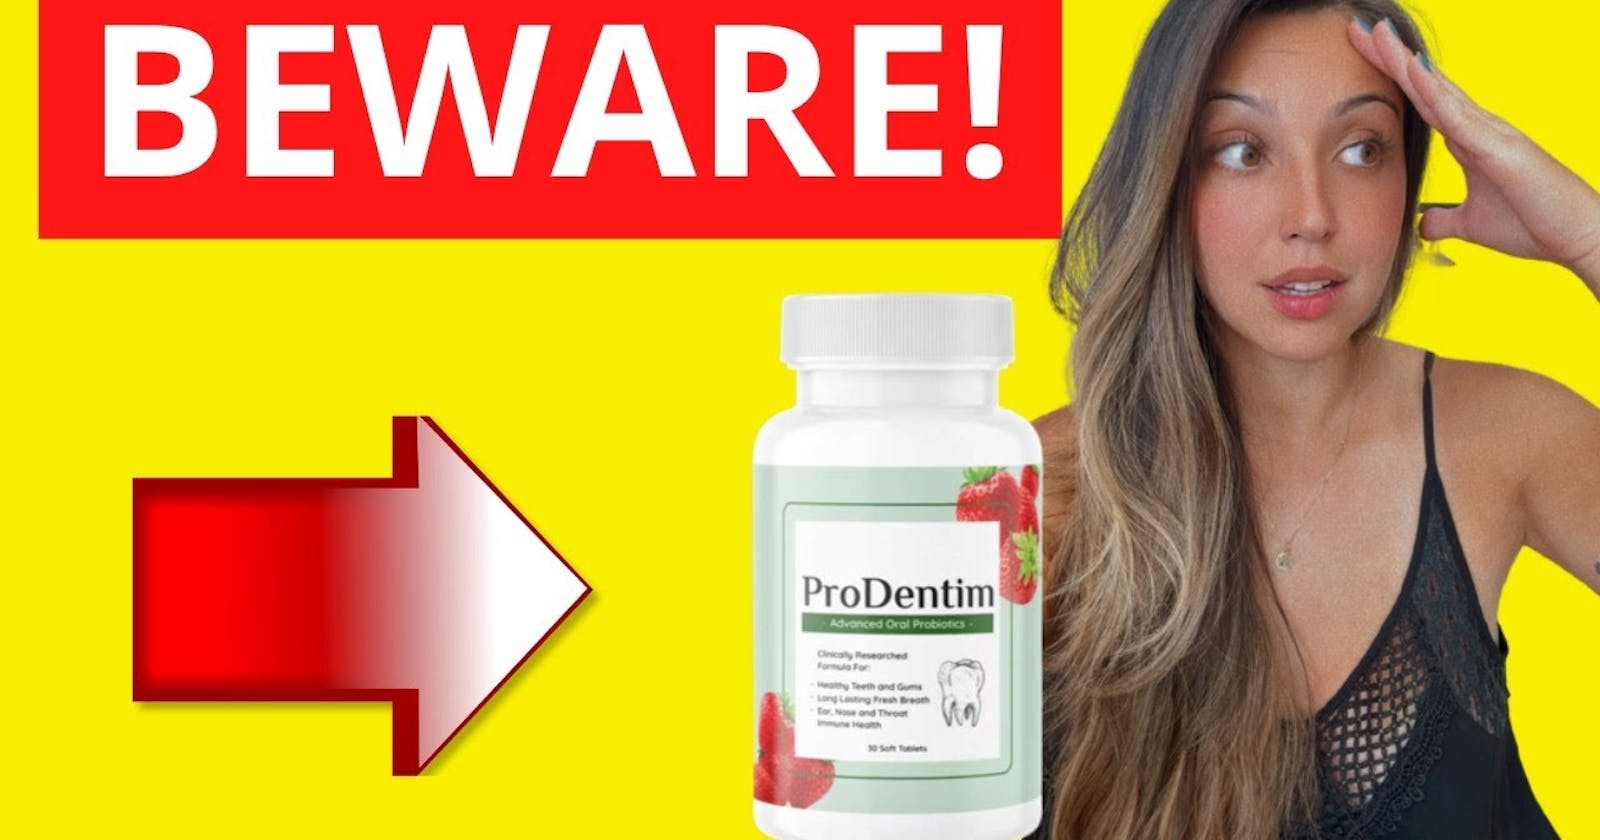 ProDentim - Dental Results, Benefits. Uses, Price And Ingredients?